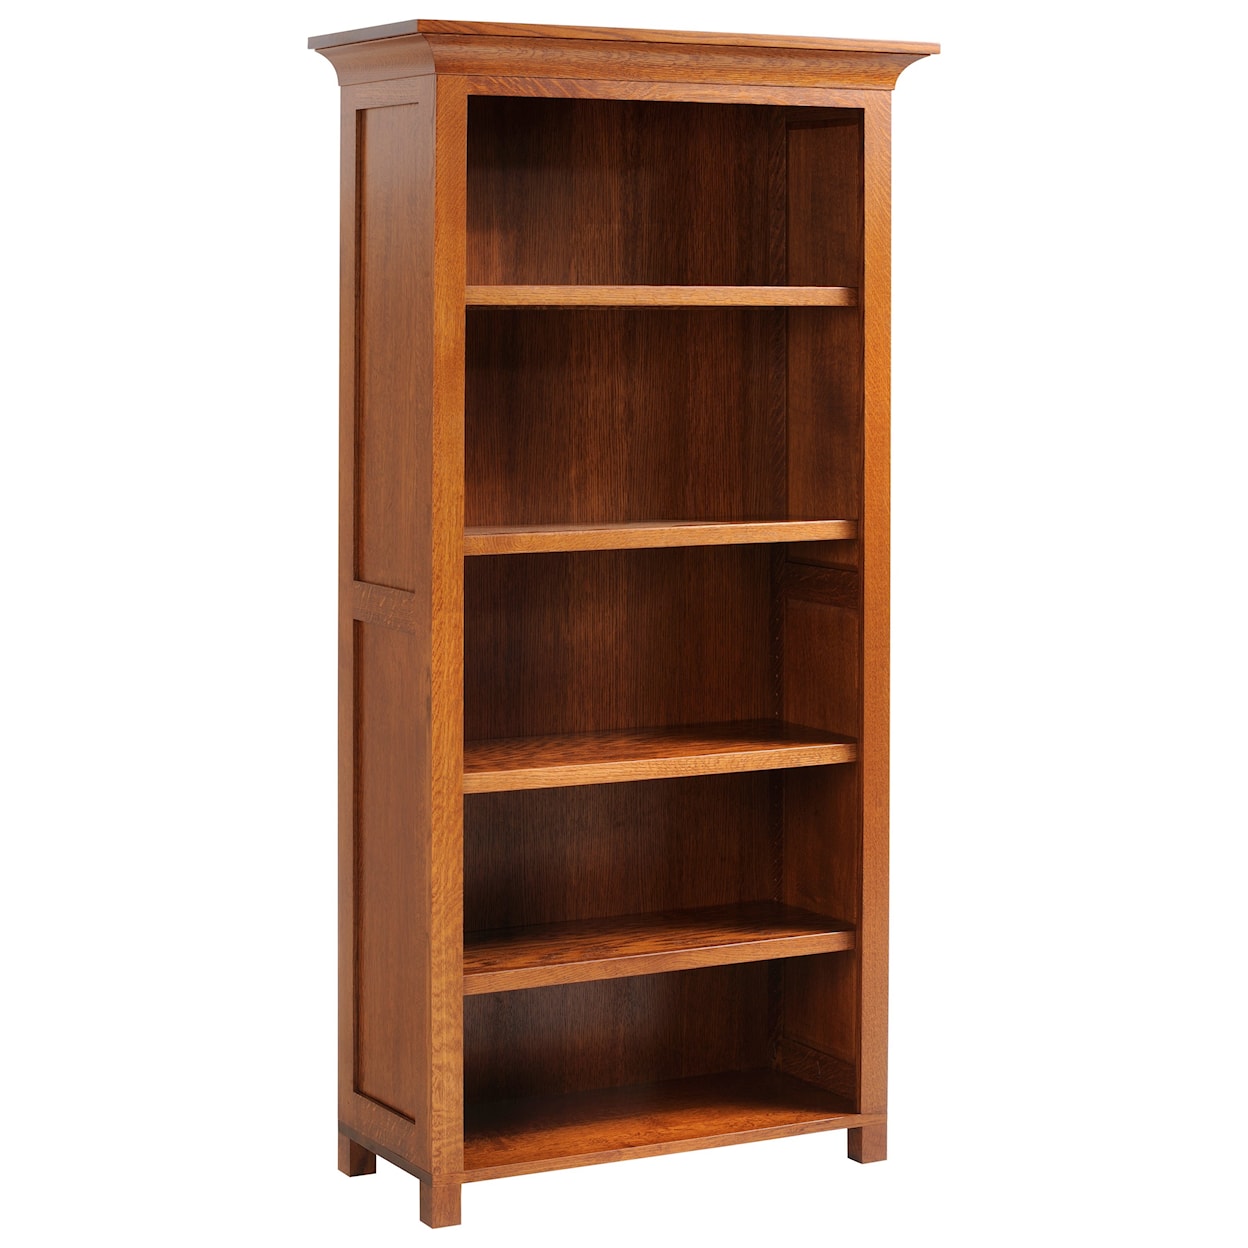 Y & T Woodcraft Coventry Mission 60" Bookcase